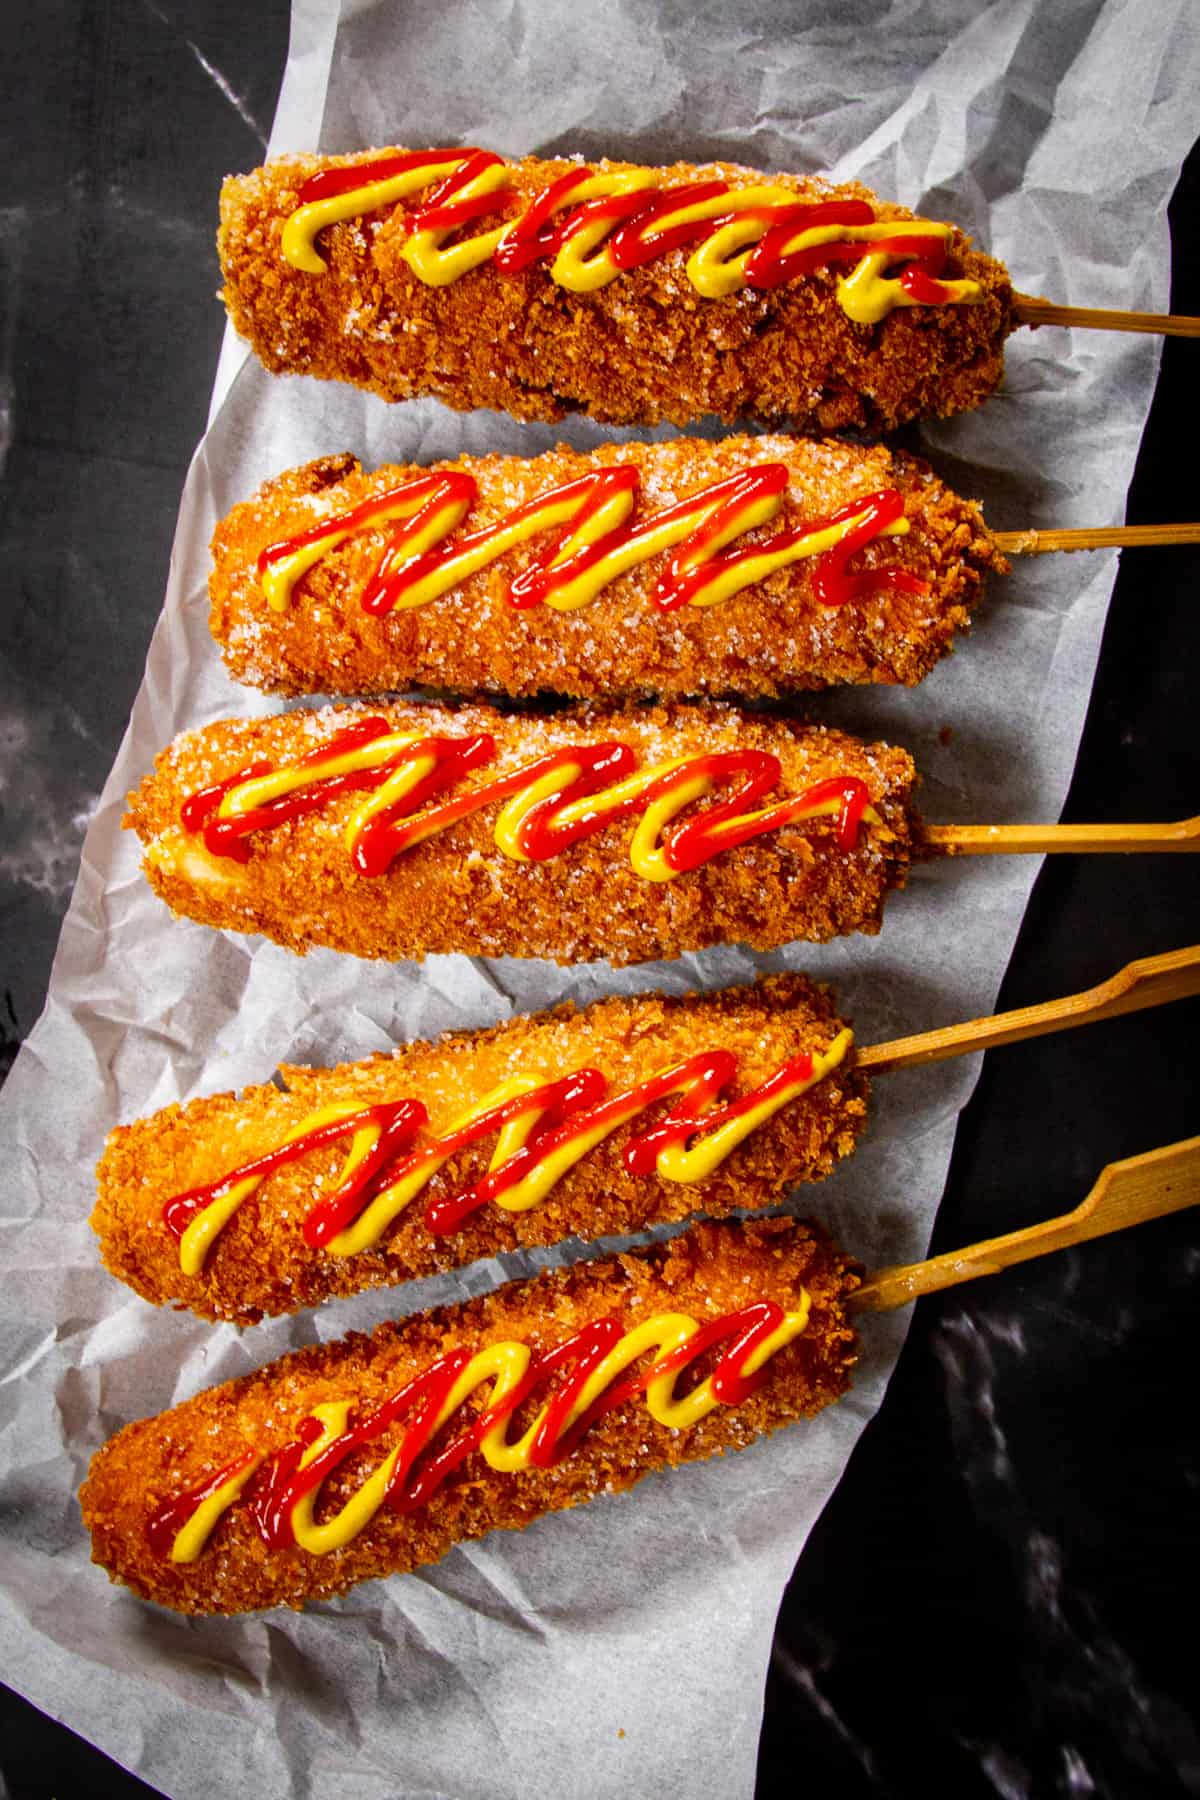 5 Korean corn dogs with ketchup and mustard on a black marble table.